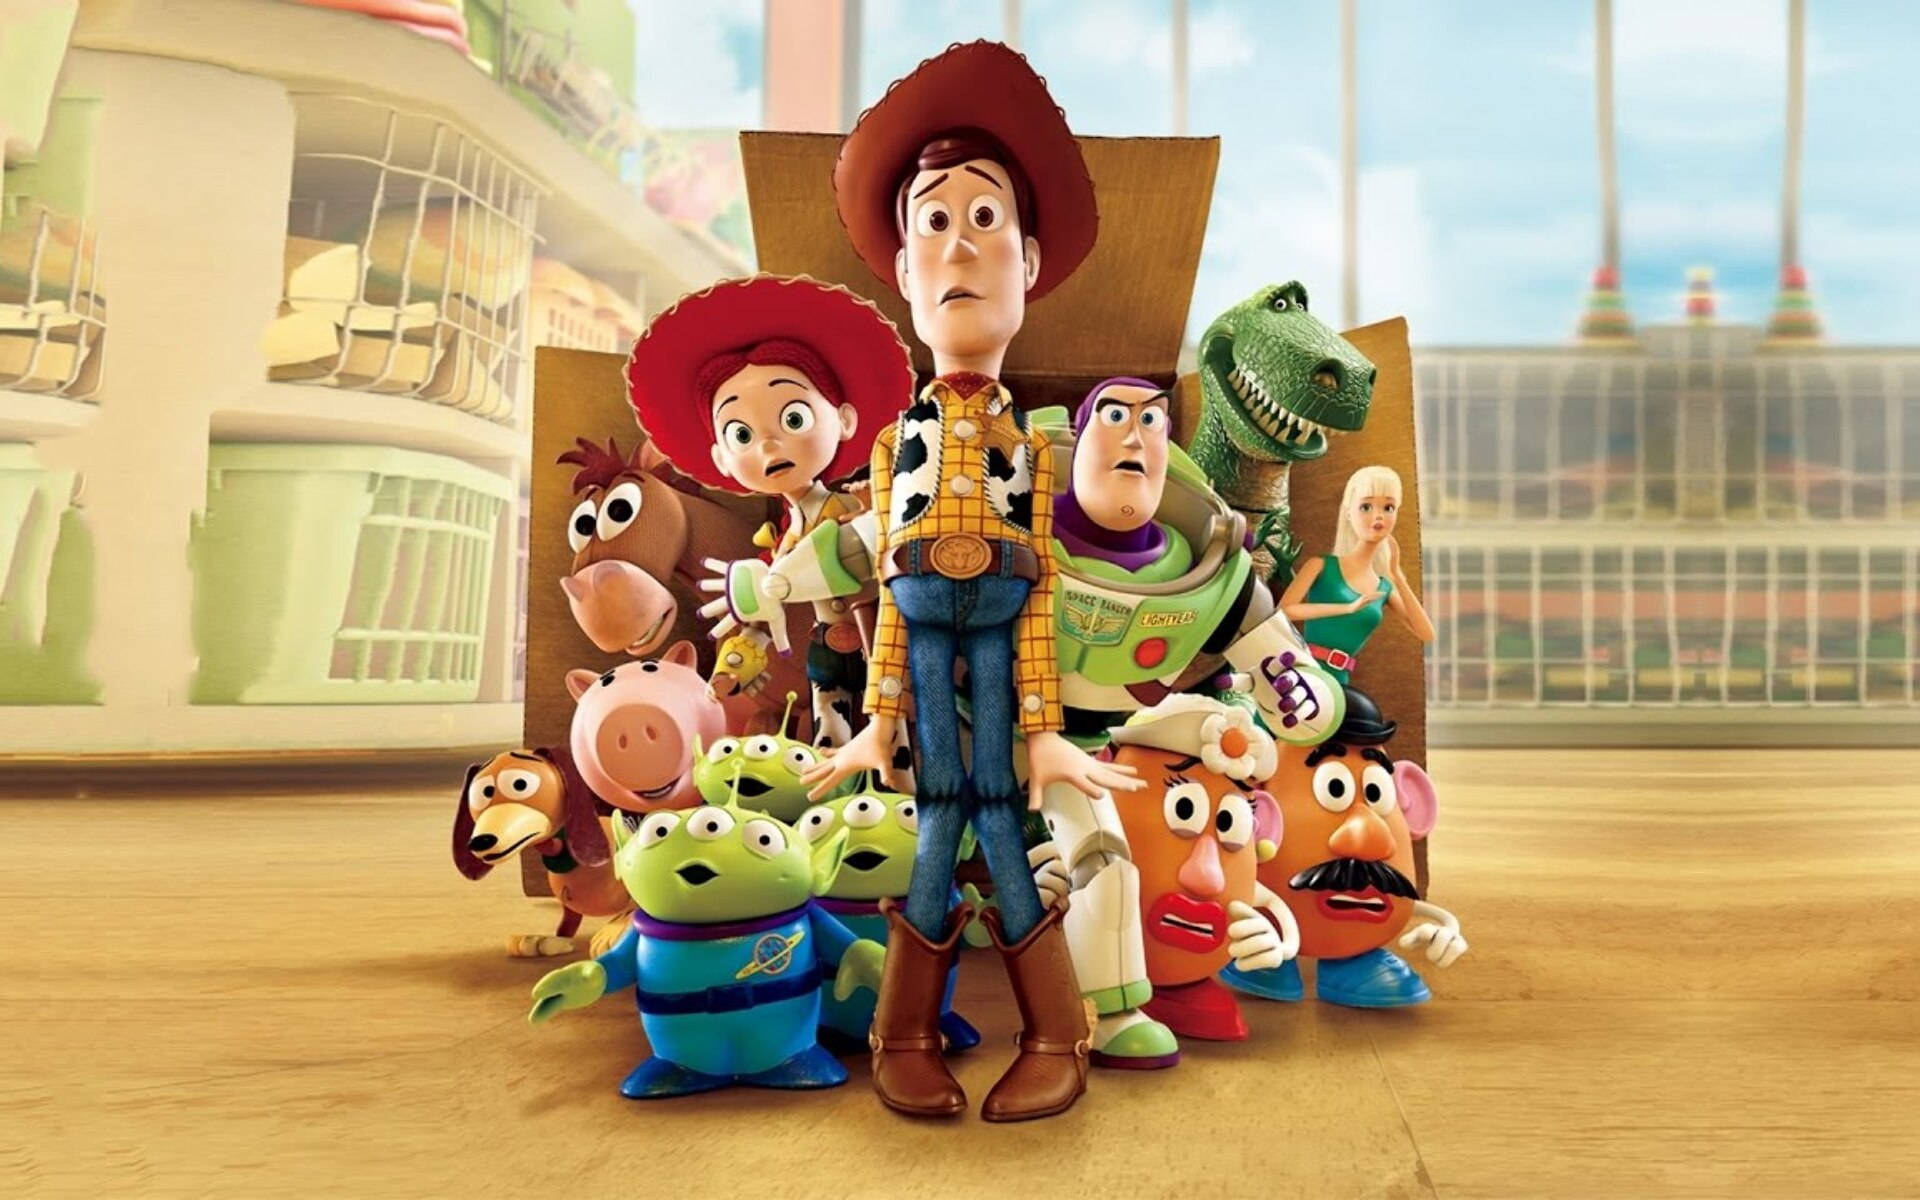 Download Toy Story 2 Characters In A Box Wallpaper 